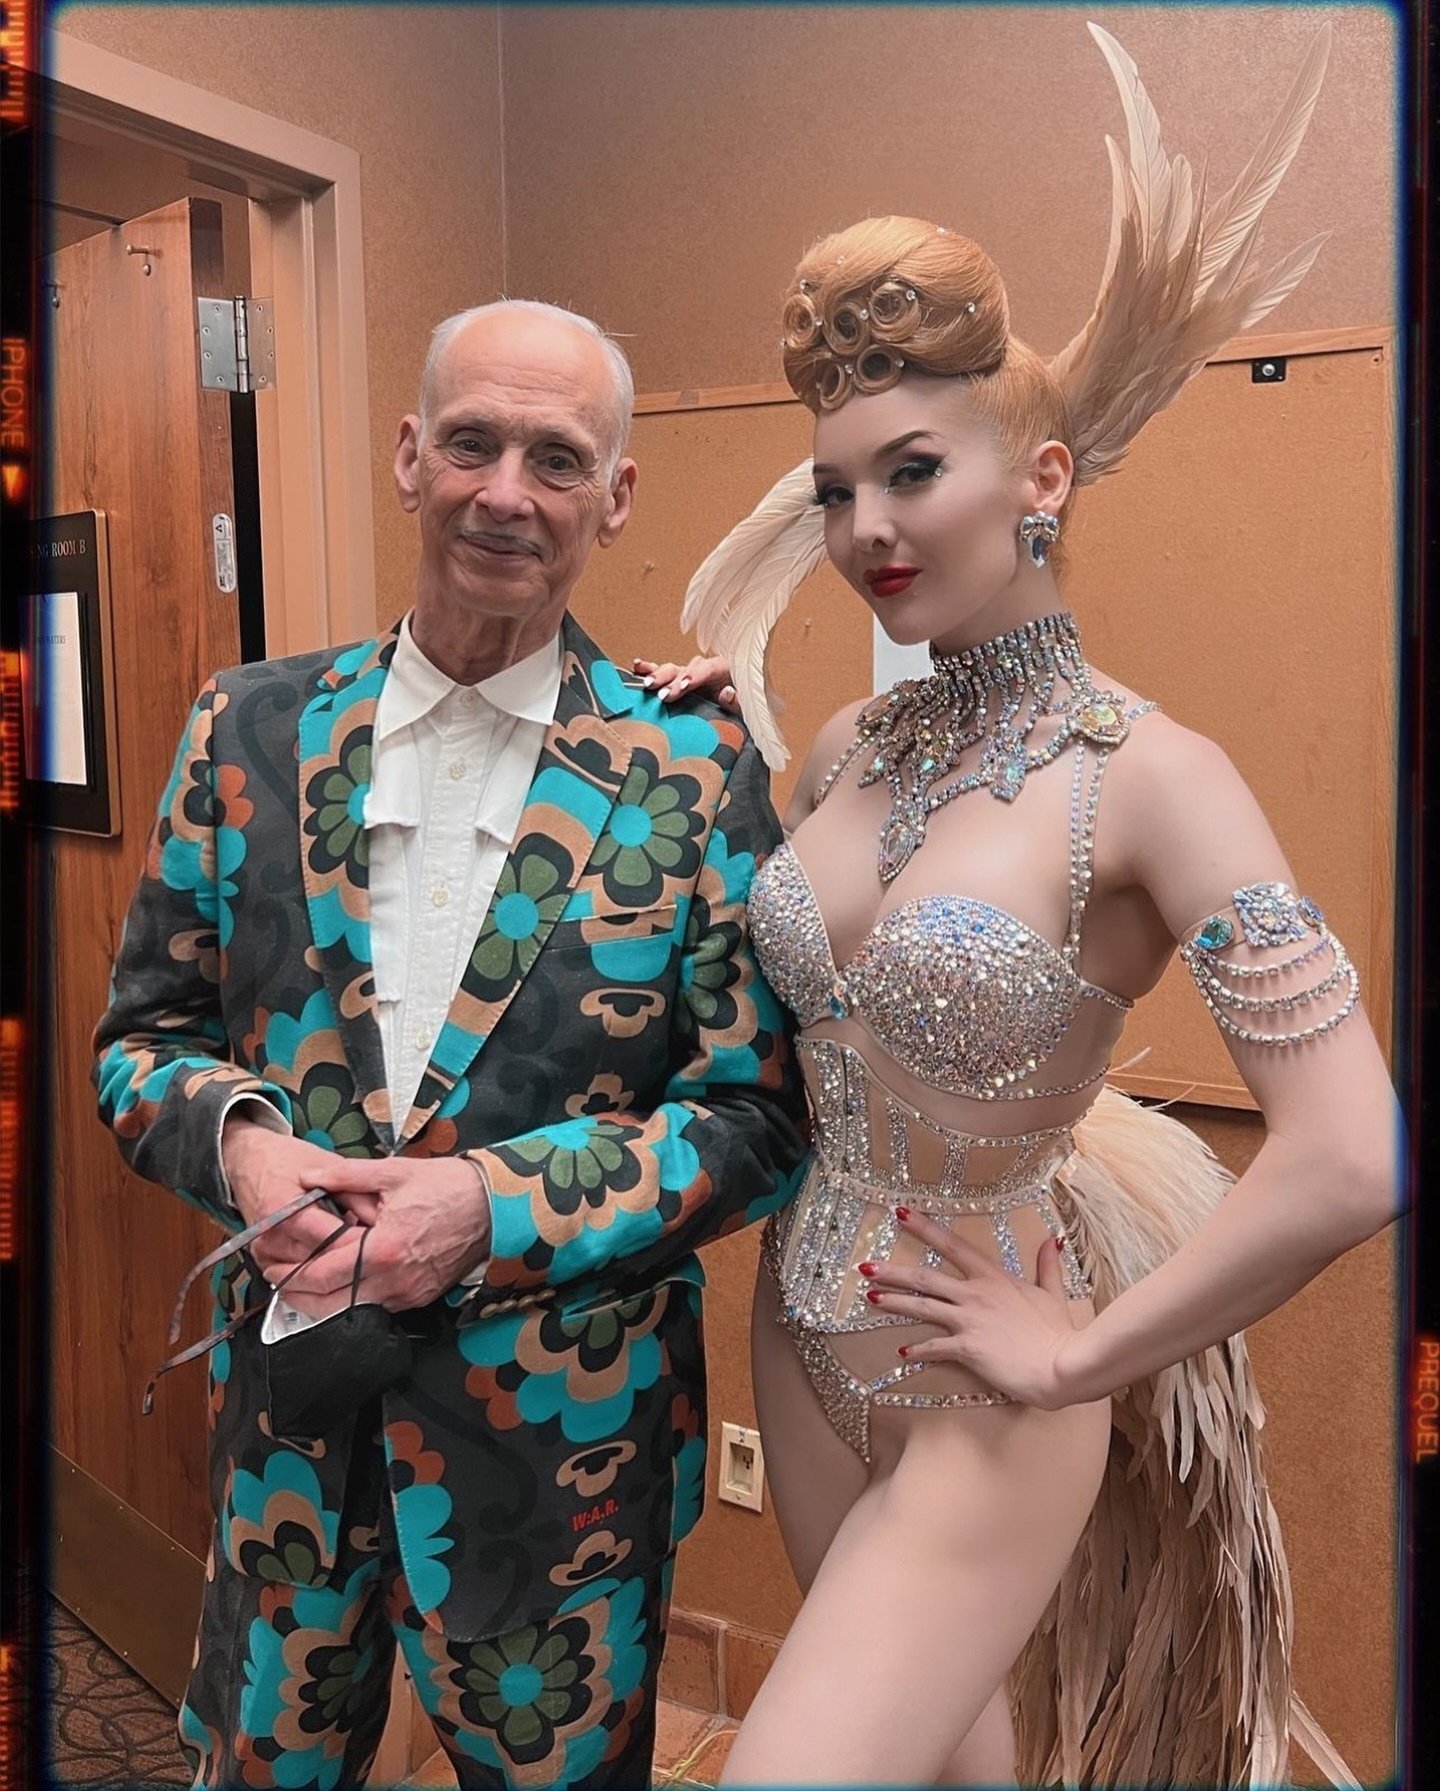 Throw back to @viva.las.vegas.vlv 2022, backstage with the one and only John Waters! I am thrilled to be returning to the burlesque showcase again this year, I have an all new number I&rsquo;ll be debuting and I&rsquo;m so excited to share it with yo